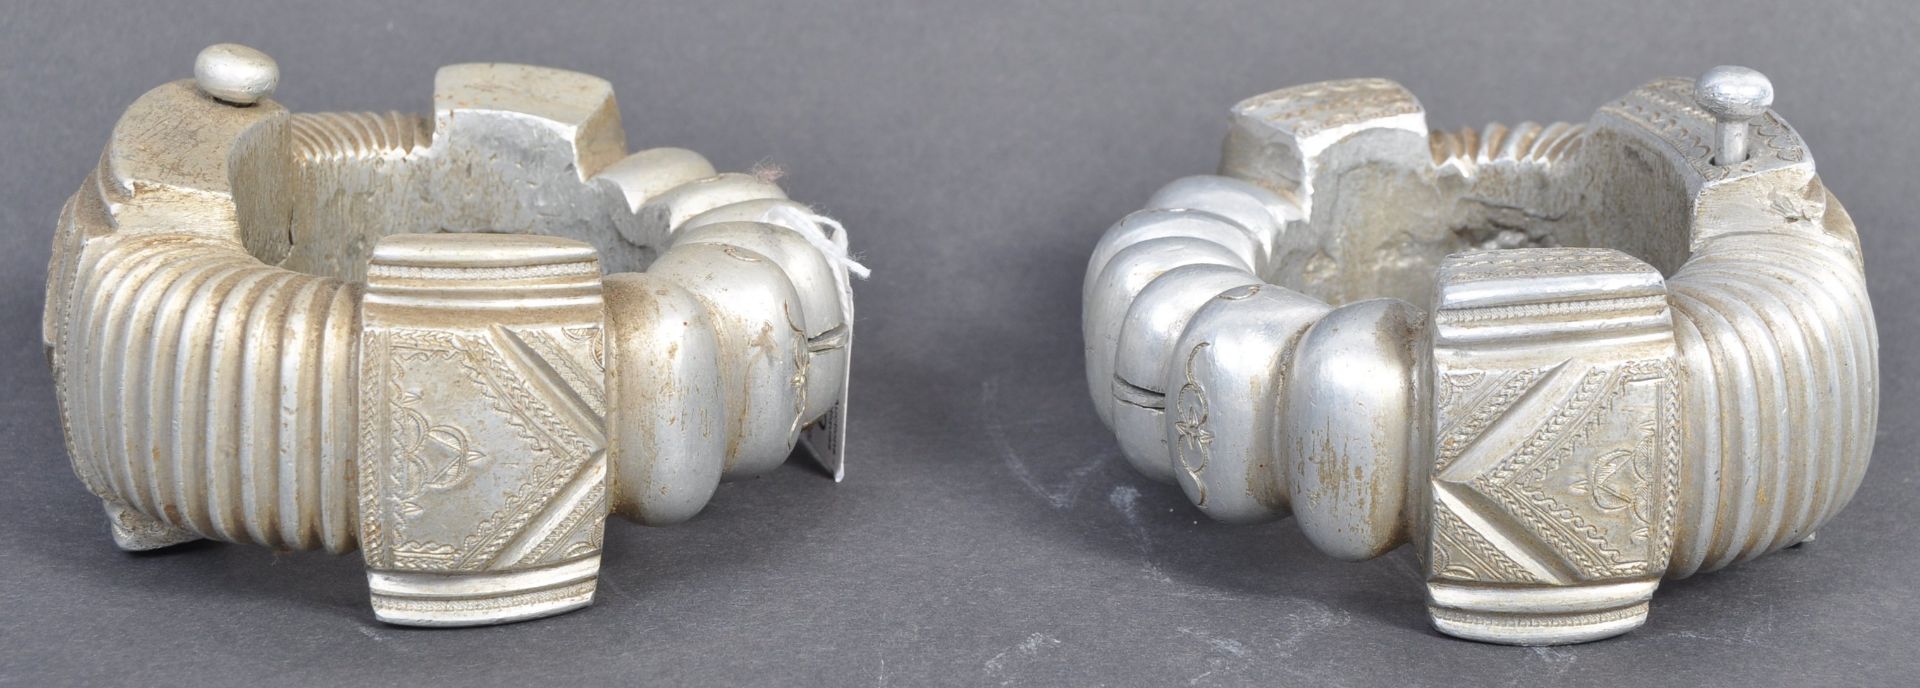 TRIBAL ANTIQUITIES - PAIR OF AFRICAN TRIBAL ALUMINIUM ANKLETS - Image 3 of 6